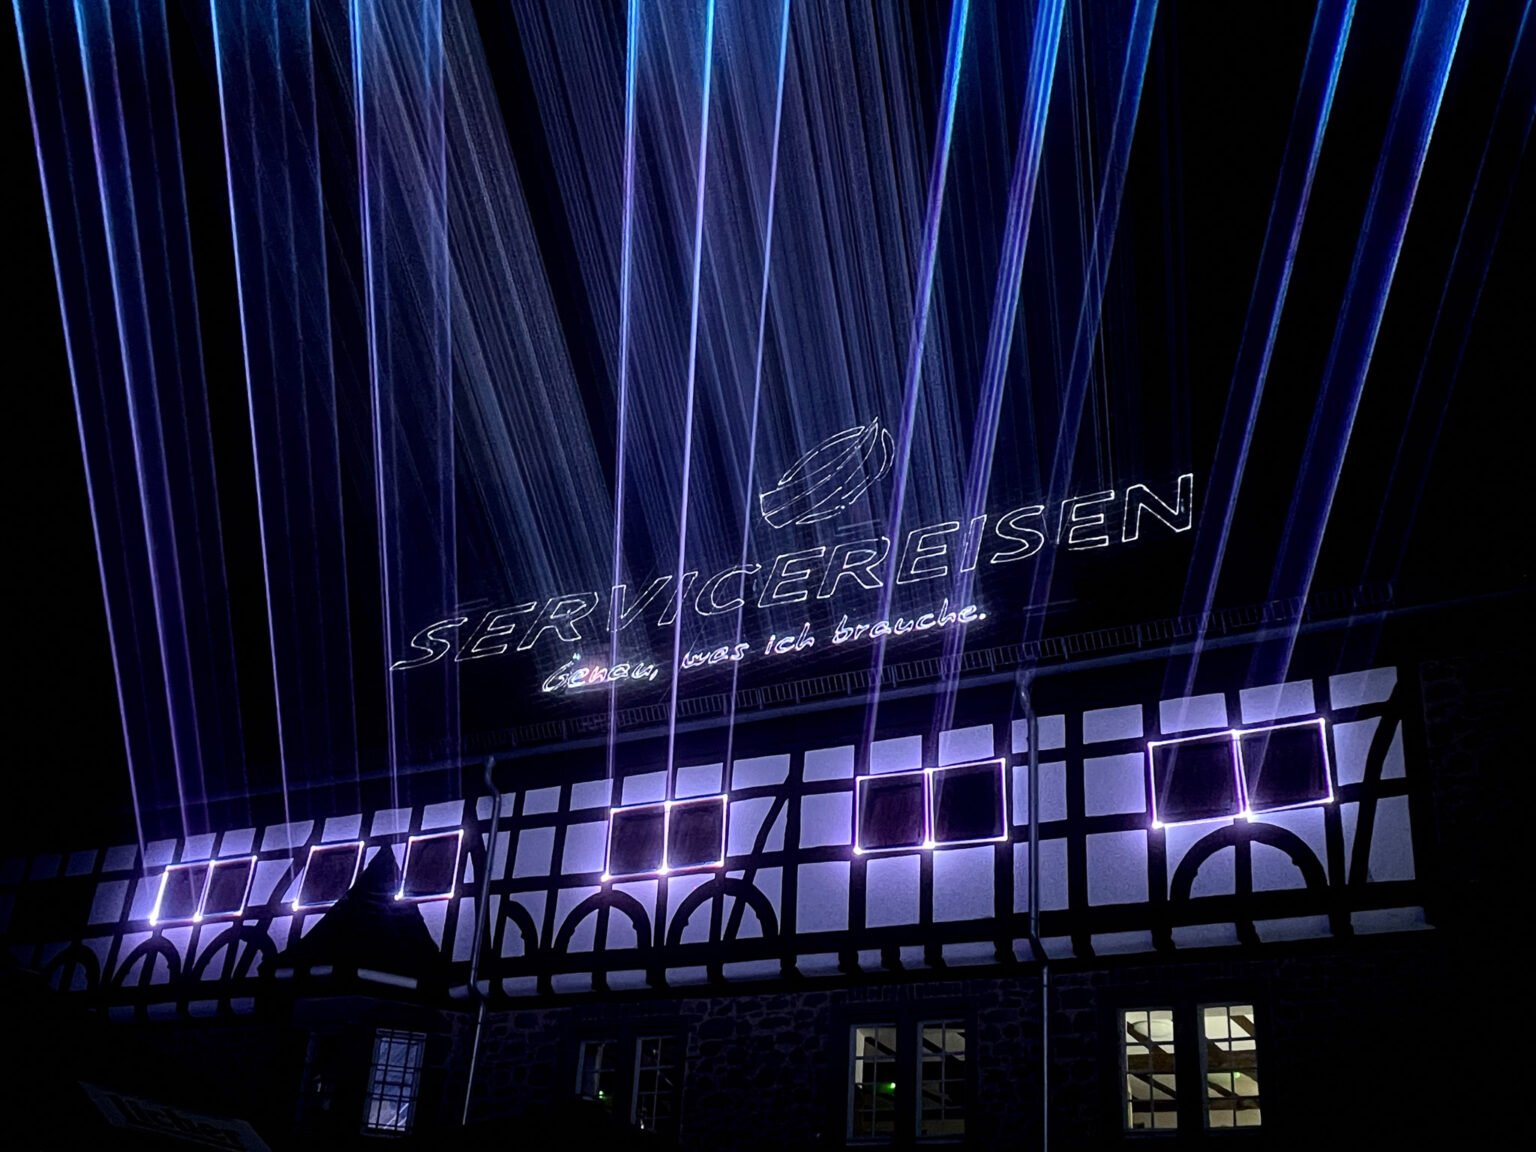 Multimedia Show with Lasermapping and 3D Graphic show